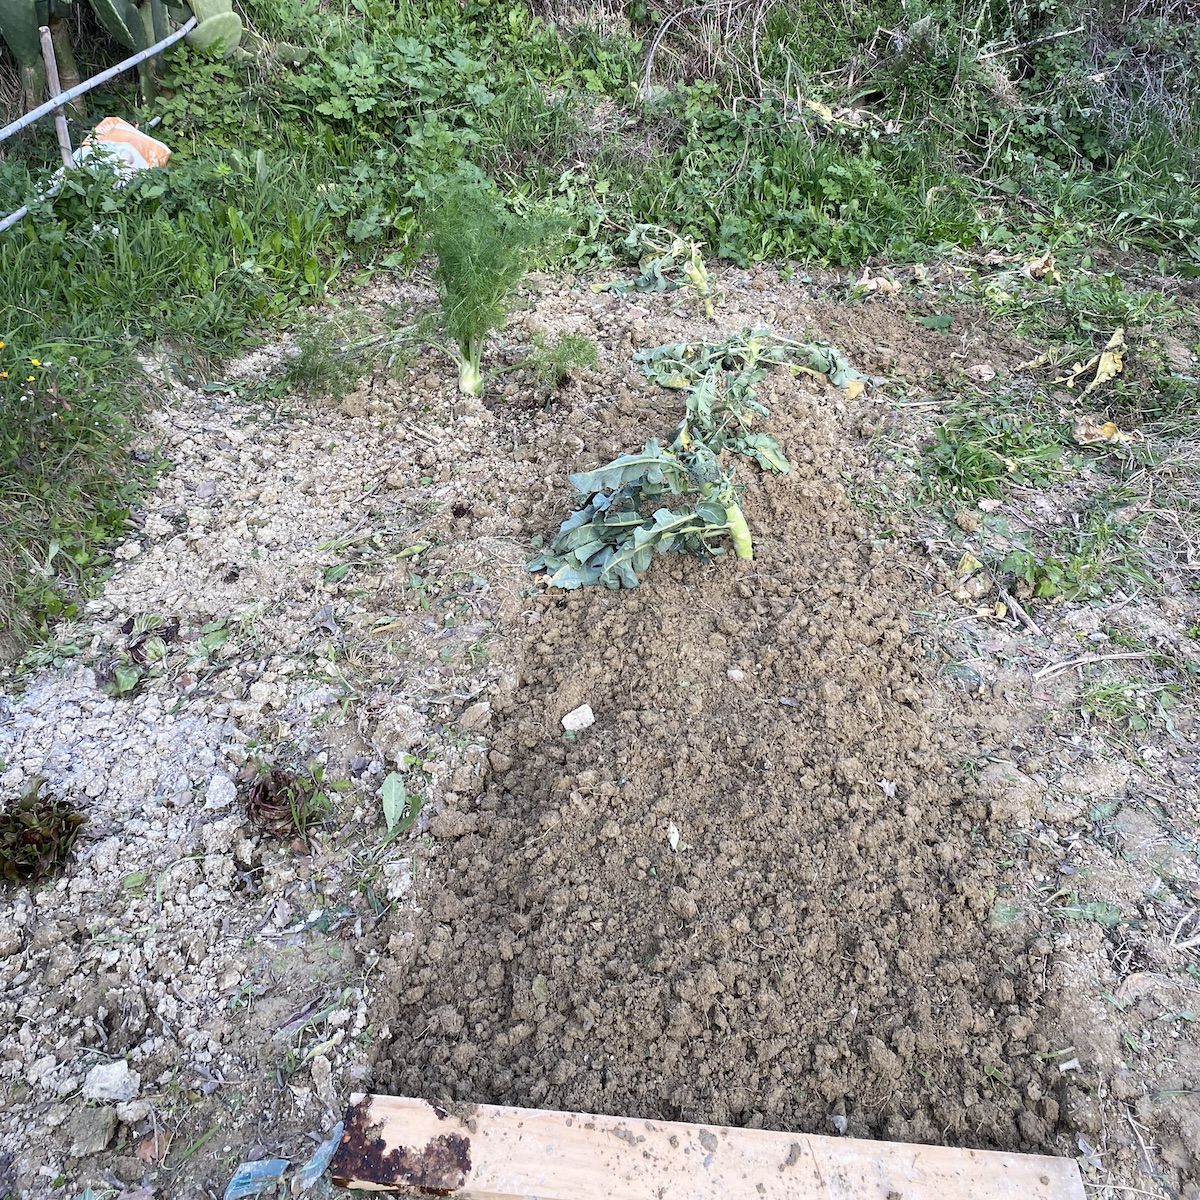 Weeded vegetable plot, with a few radicchio and a fennel bulb on the left and some replanted brassica stumps in a better-weeded bed on the right.